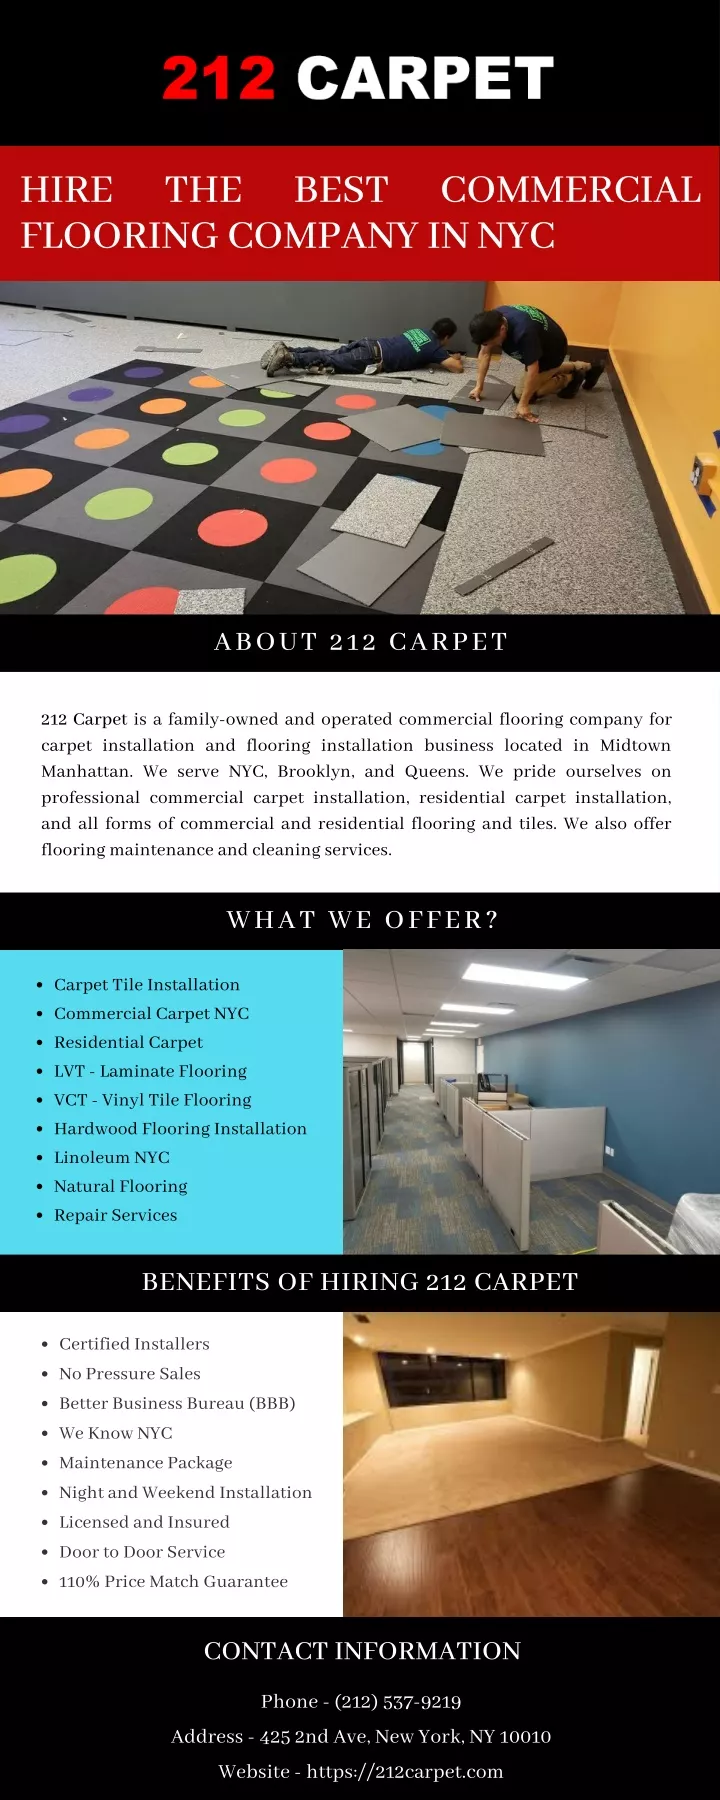 hire flooring company in nyc